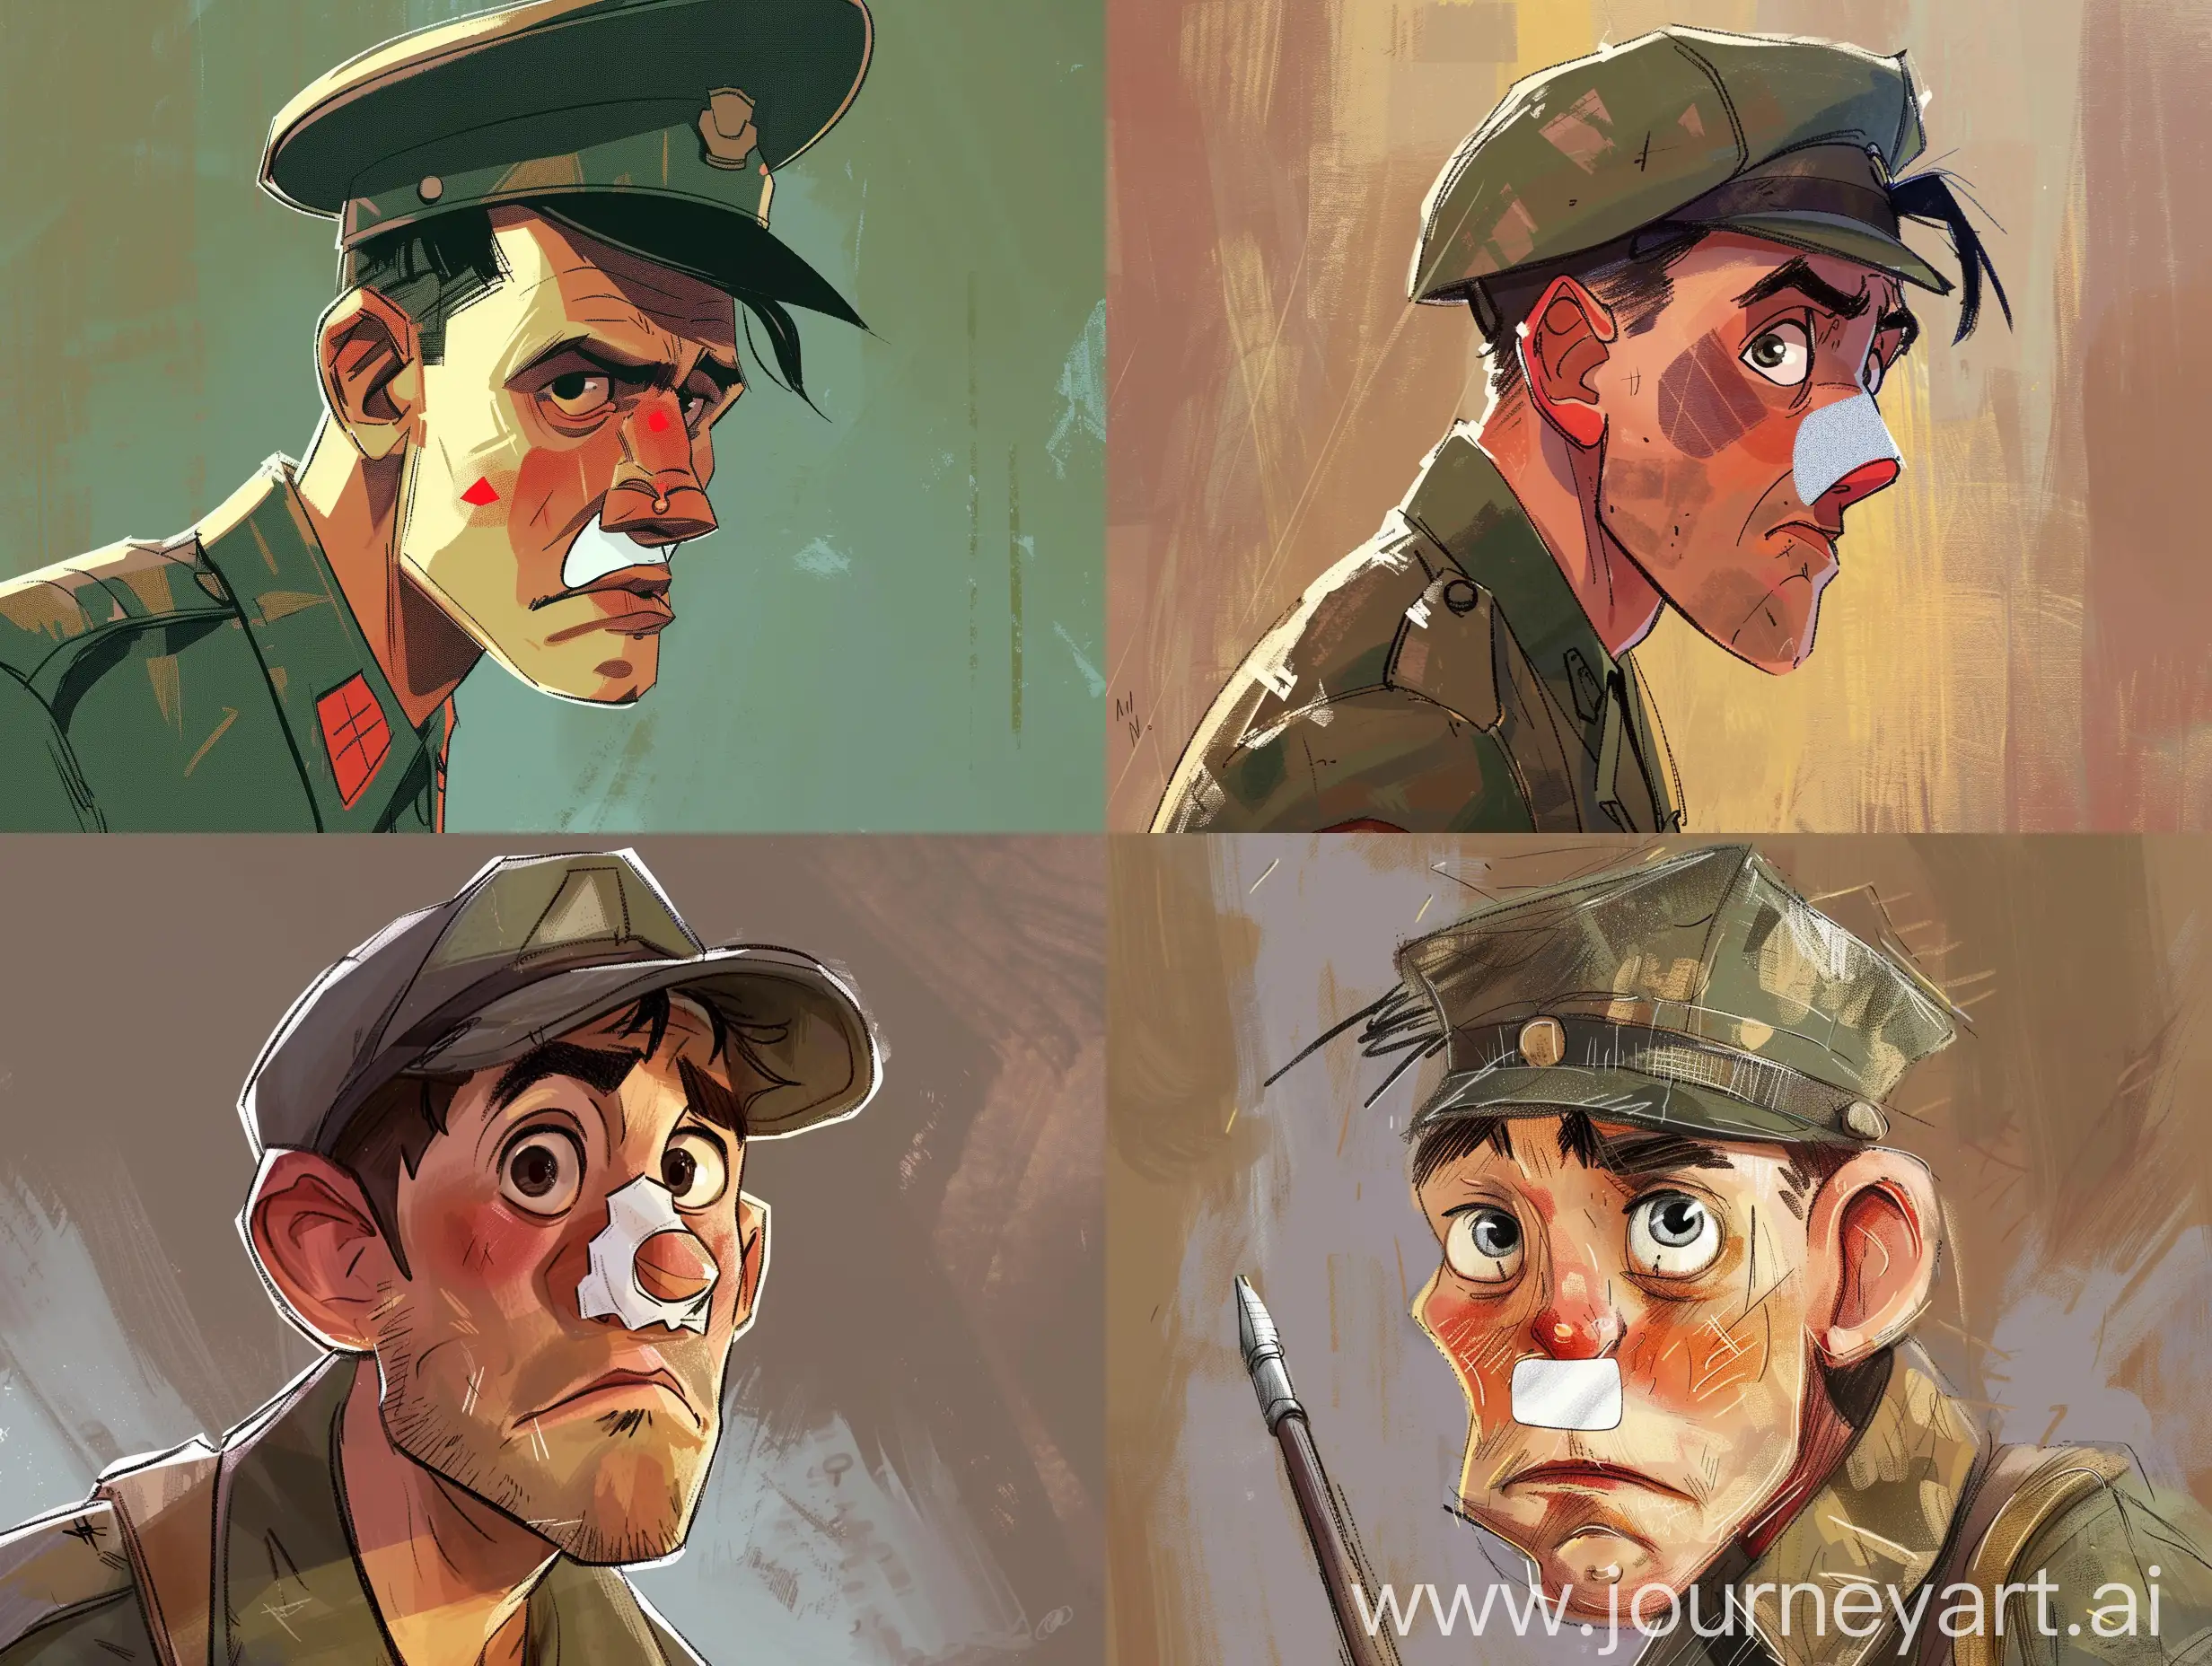 Disney-Style-World-War-II-Soldier-with-Plaster-on-Nose